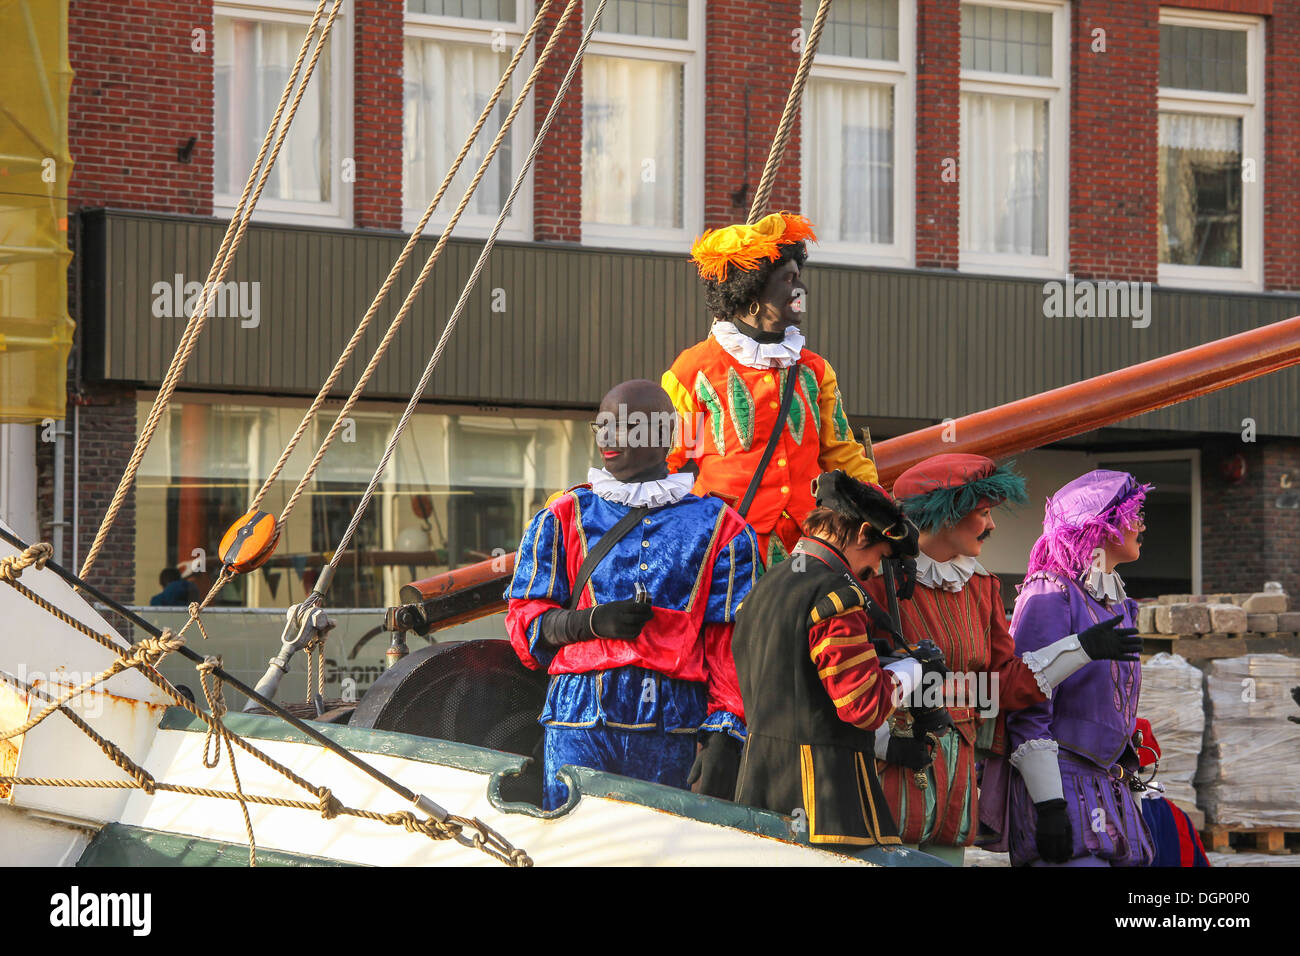 Sinterklaas arrives in the harbor of Groningen with his 'Zwarte Pieten' of which some are black and some are white. Stock Photo